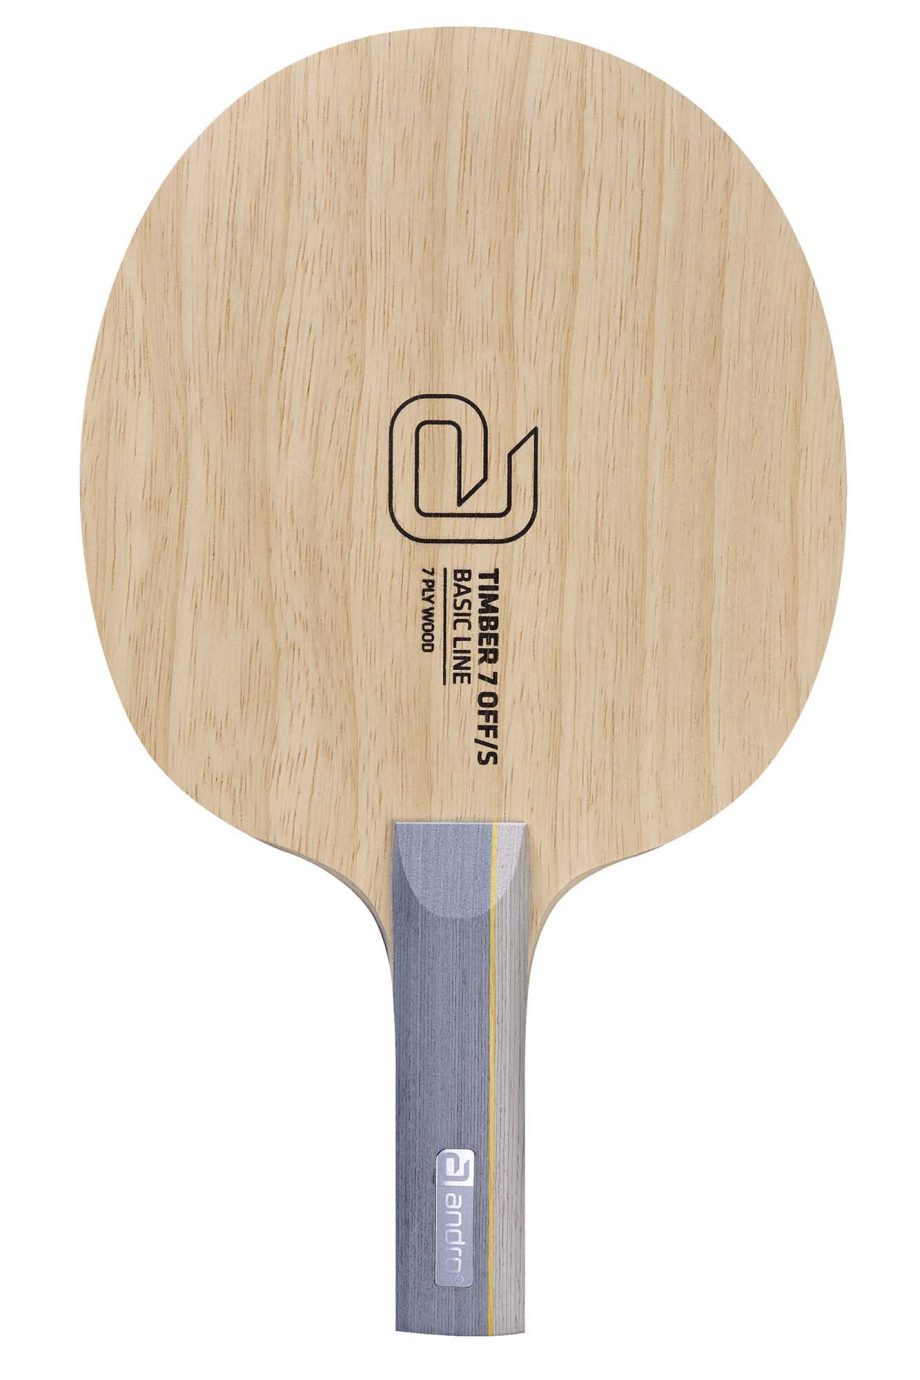 Andro Timber 7 OFF S table tennis blade